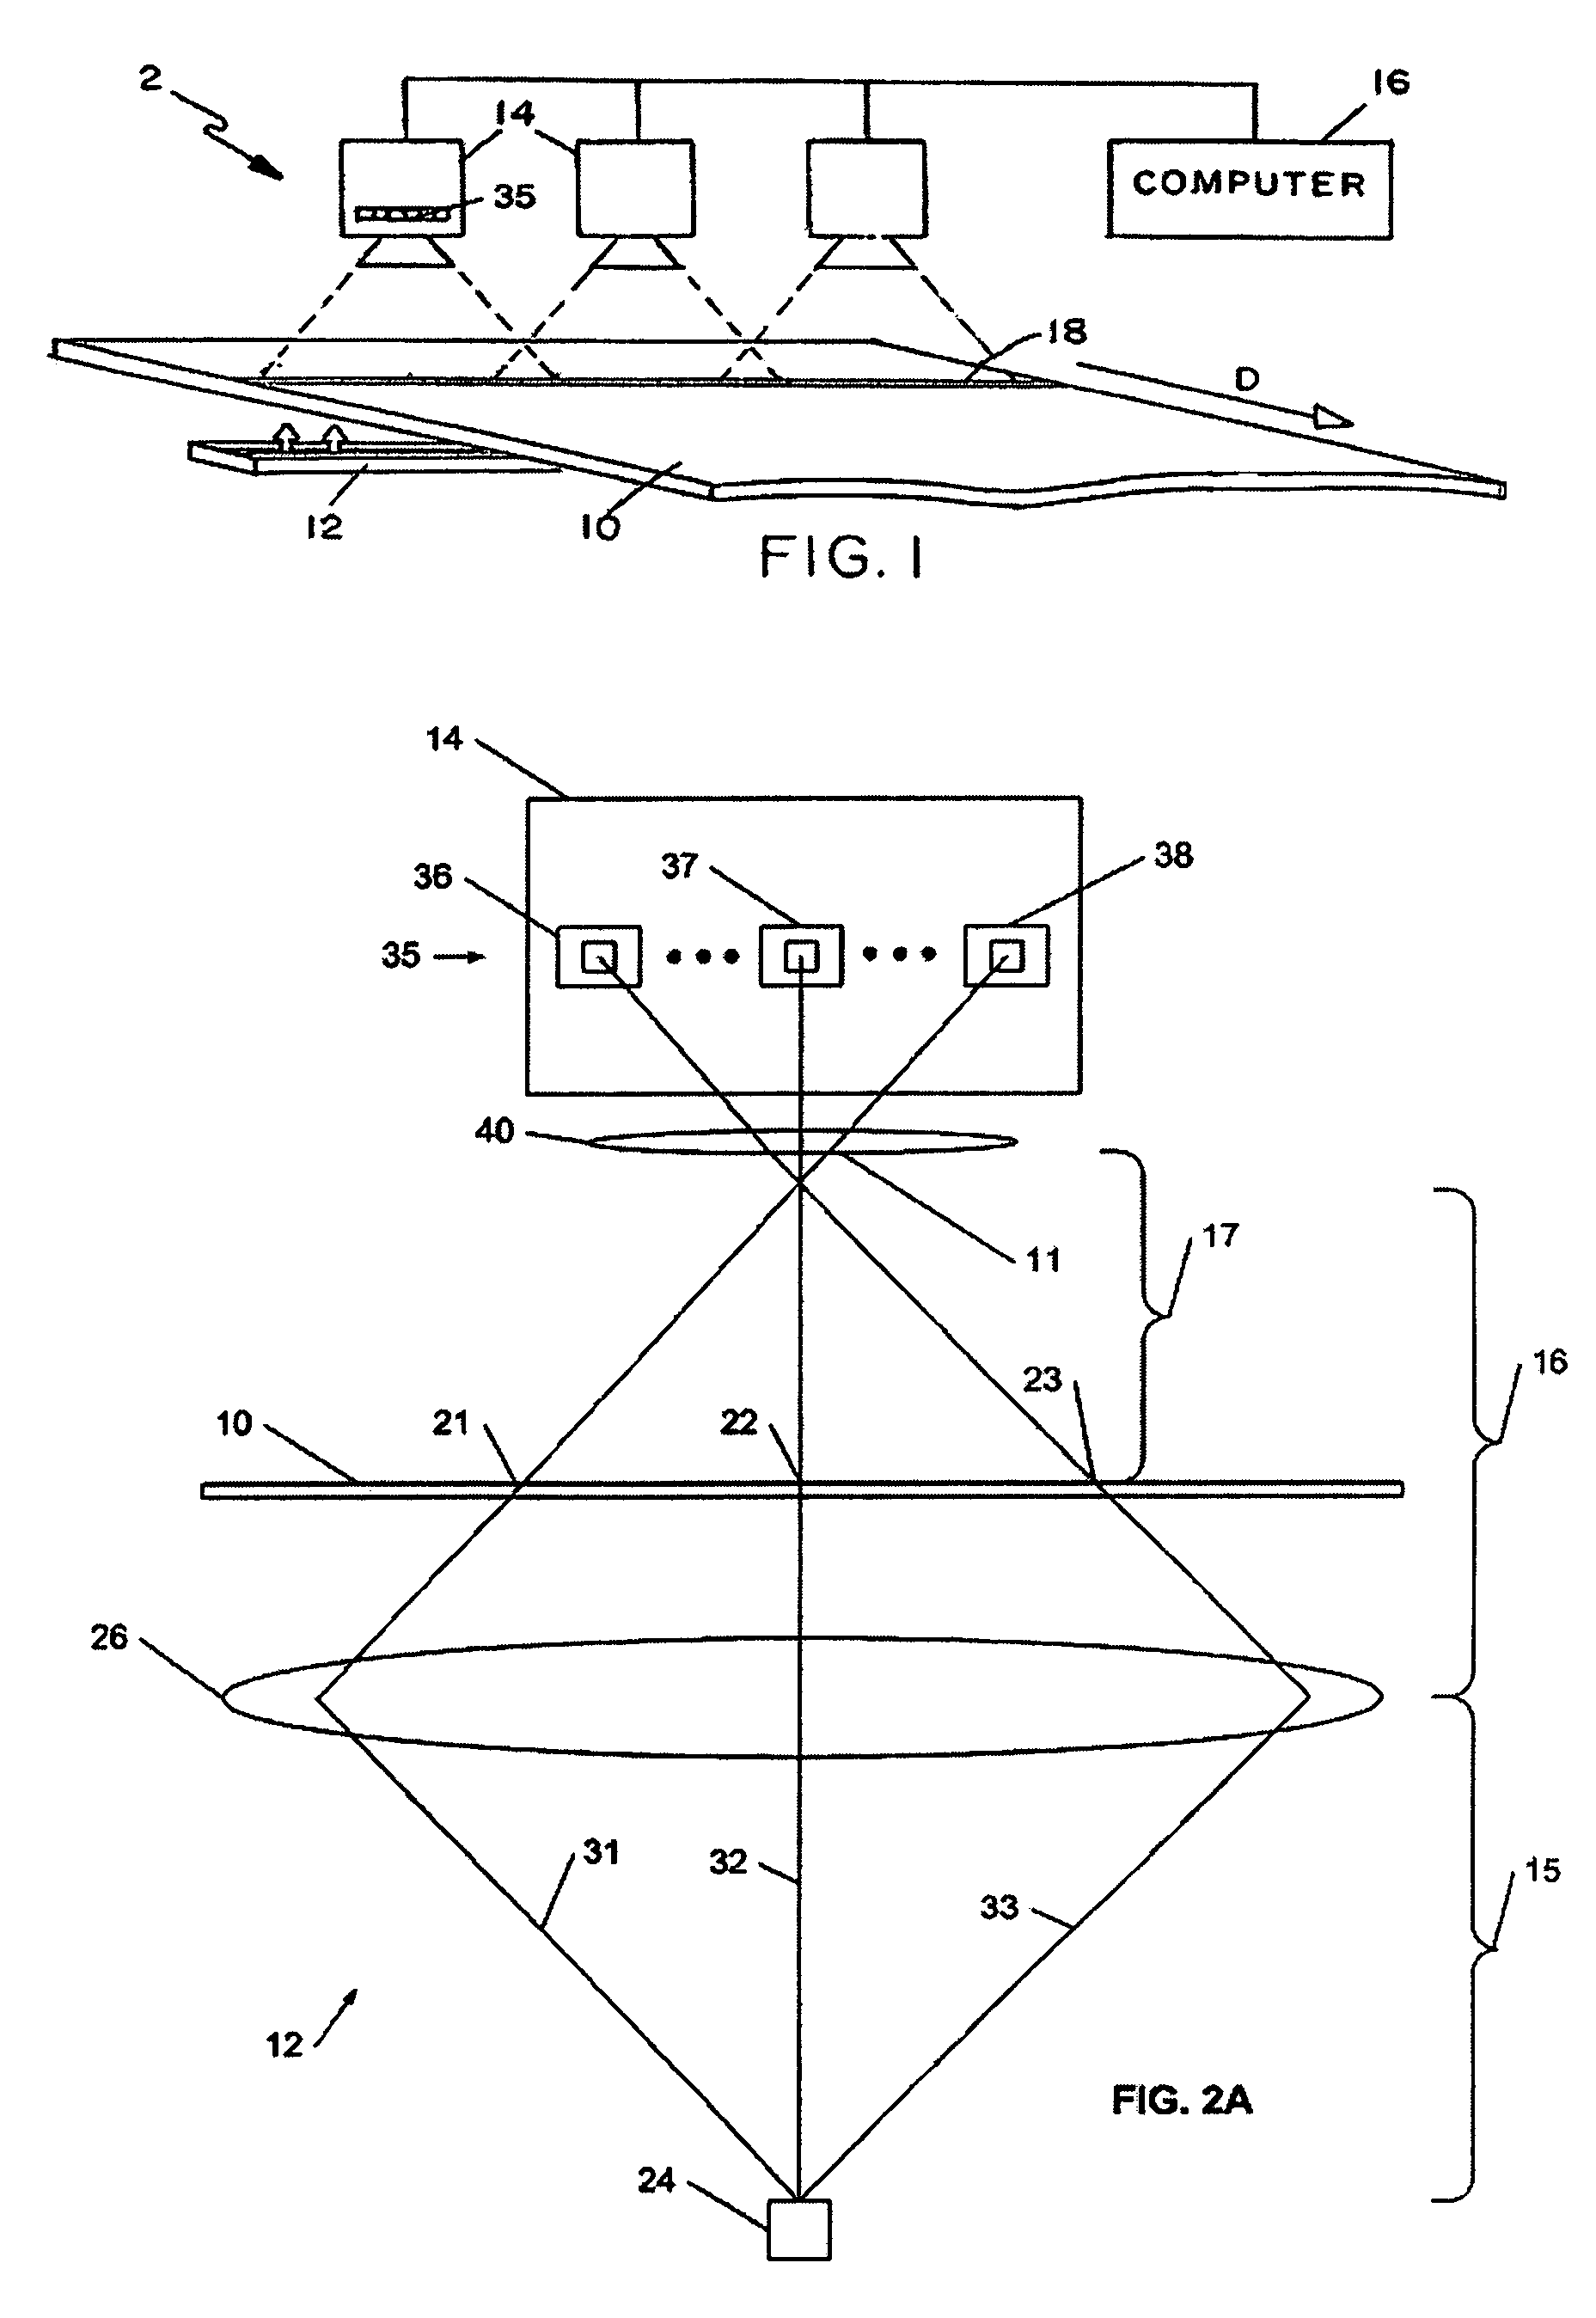 Illumination system for material inspection